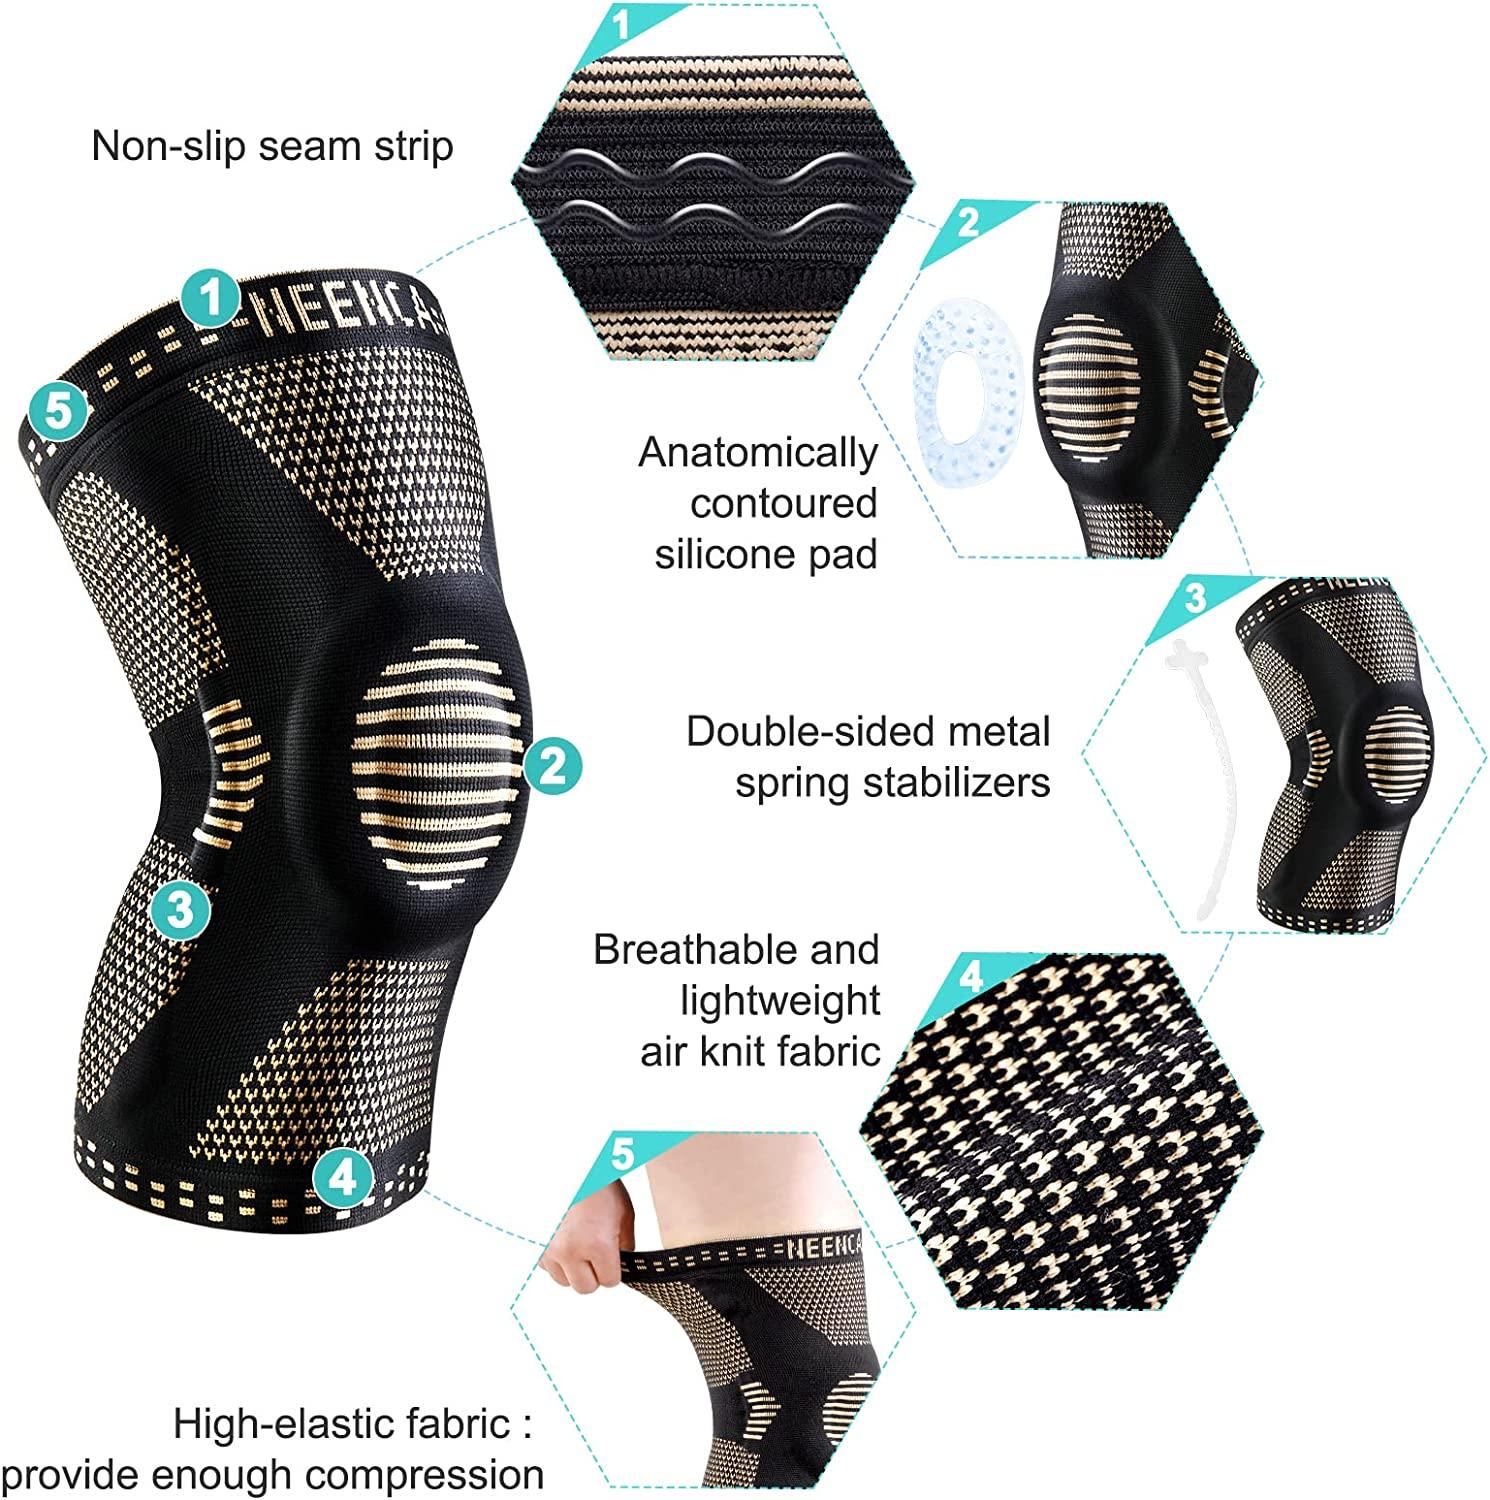 NEENCA Copper Knee Brace, Professional Knee Support with Patella Gel Pad &  Side Stabilizers, Plus Size Compression Sleeves for Knee Pain, Sports,  Workout, Arthritis, ACL, Joint Pain Relief - Single Large